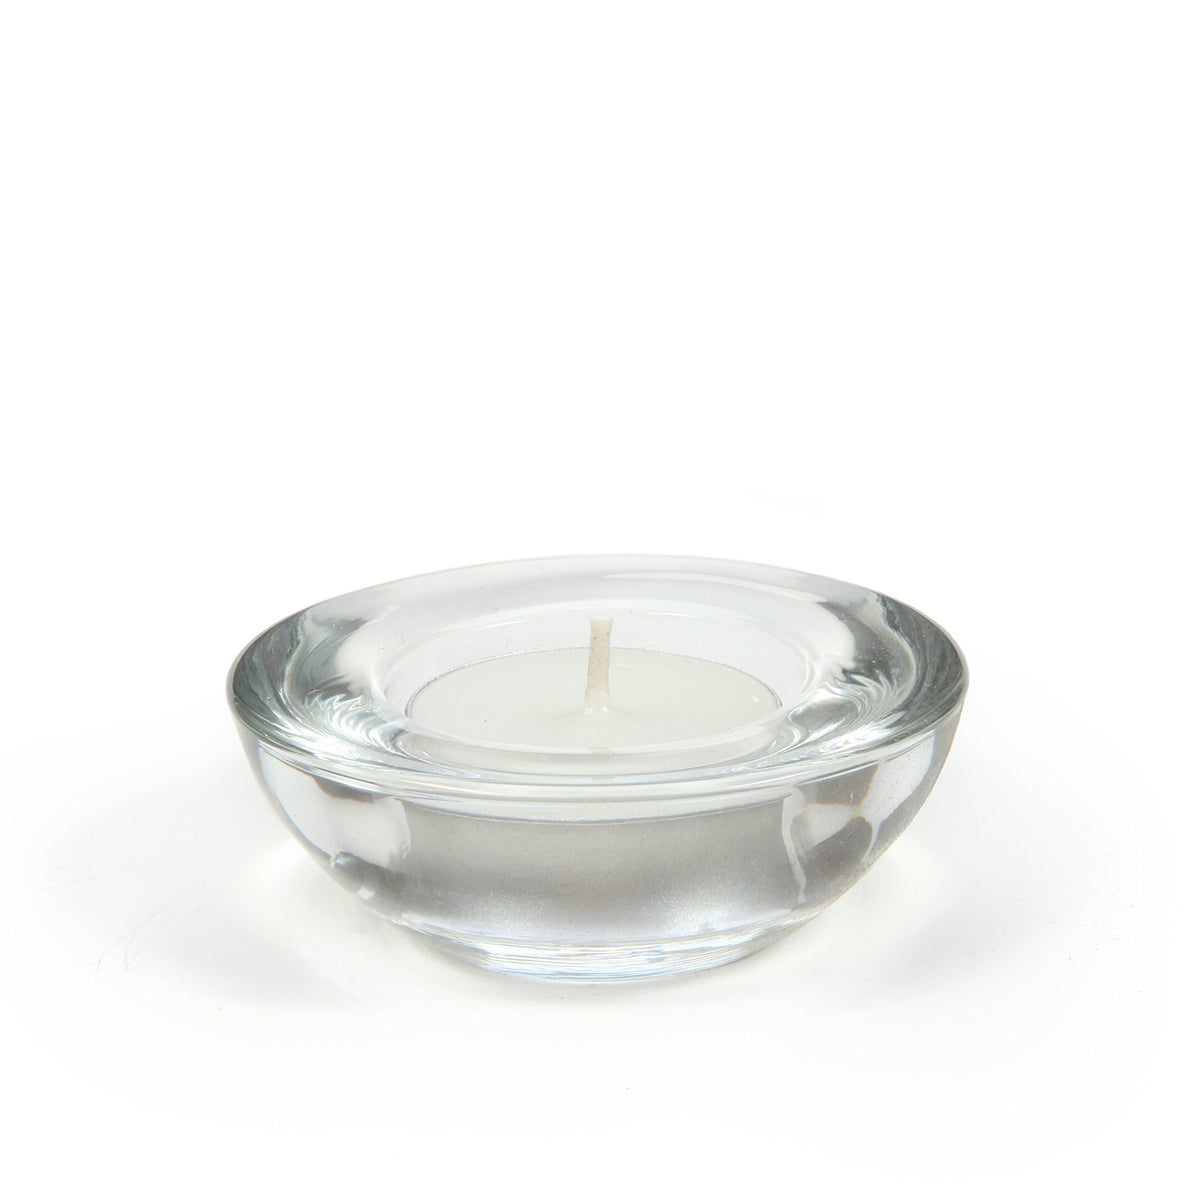 HOSLEY®  Glass Clear Tealight Holders, Set of 18, 3 inches Diameter each